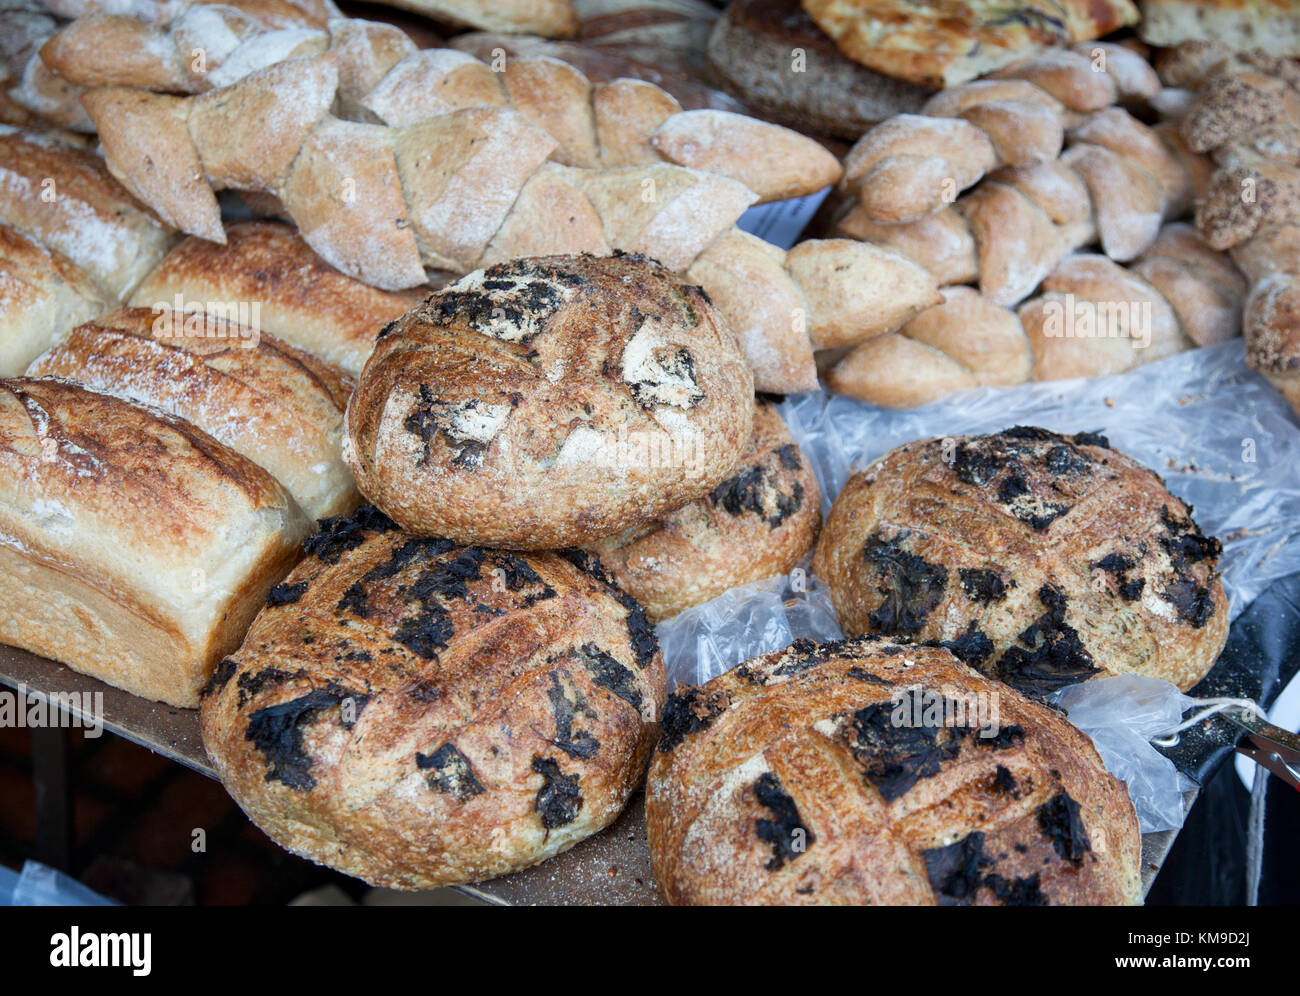 A close up of unusual sour dough breads made with kale and sesame seeds on an artisan bakers stall at a Farmers Market in Stroud, Gloucestershire, UK Stock Photo